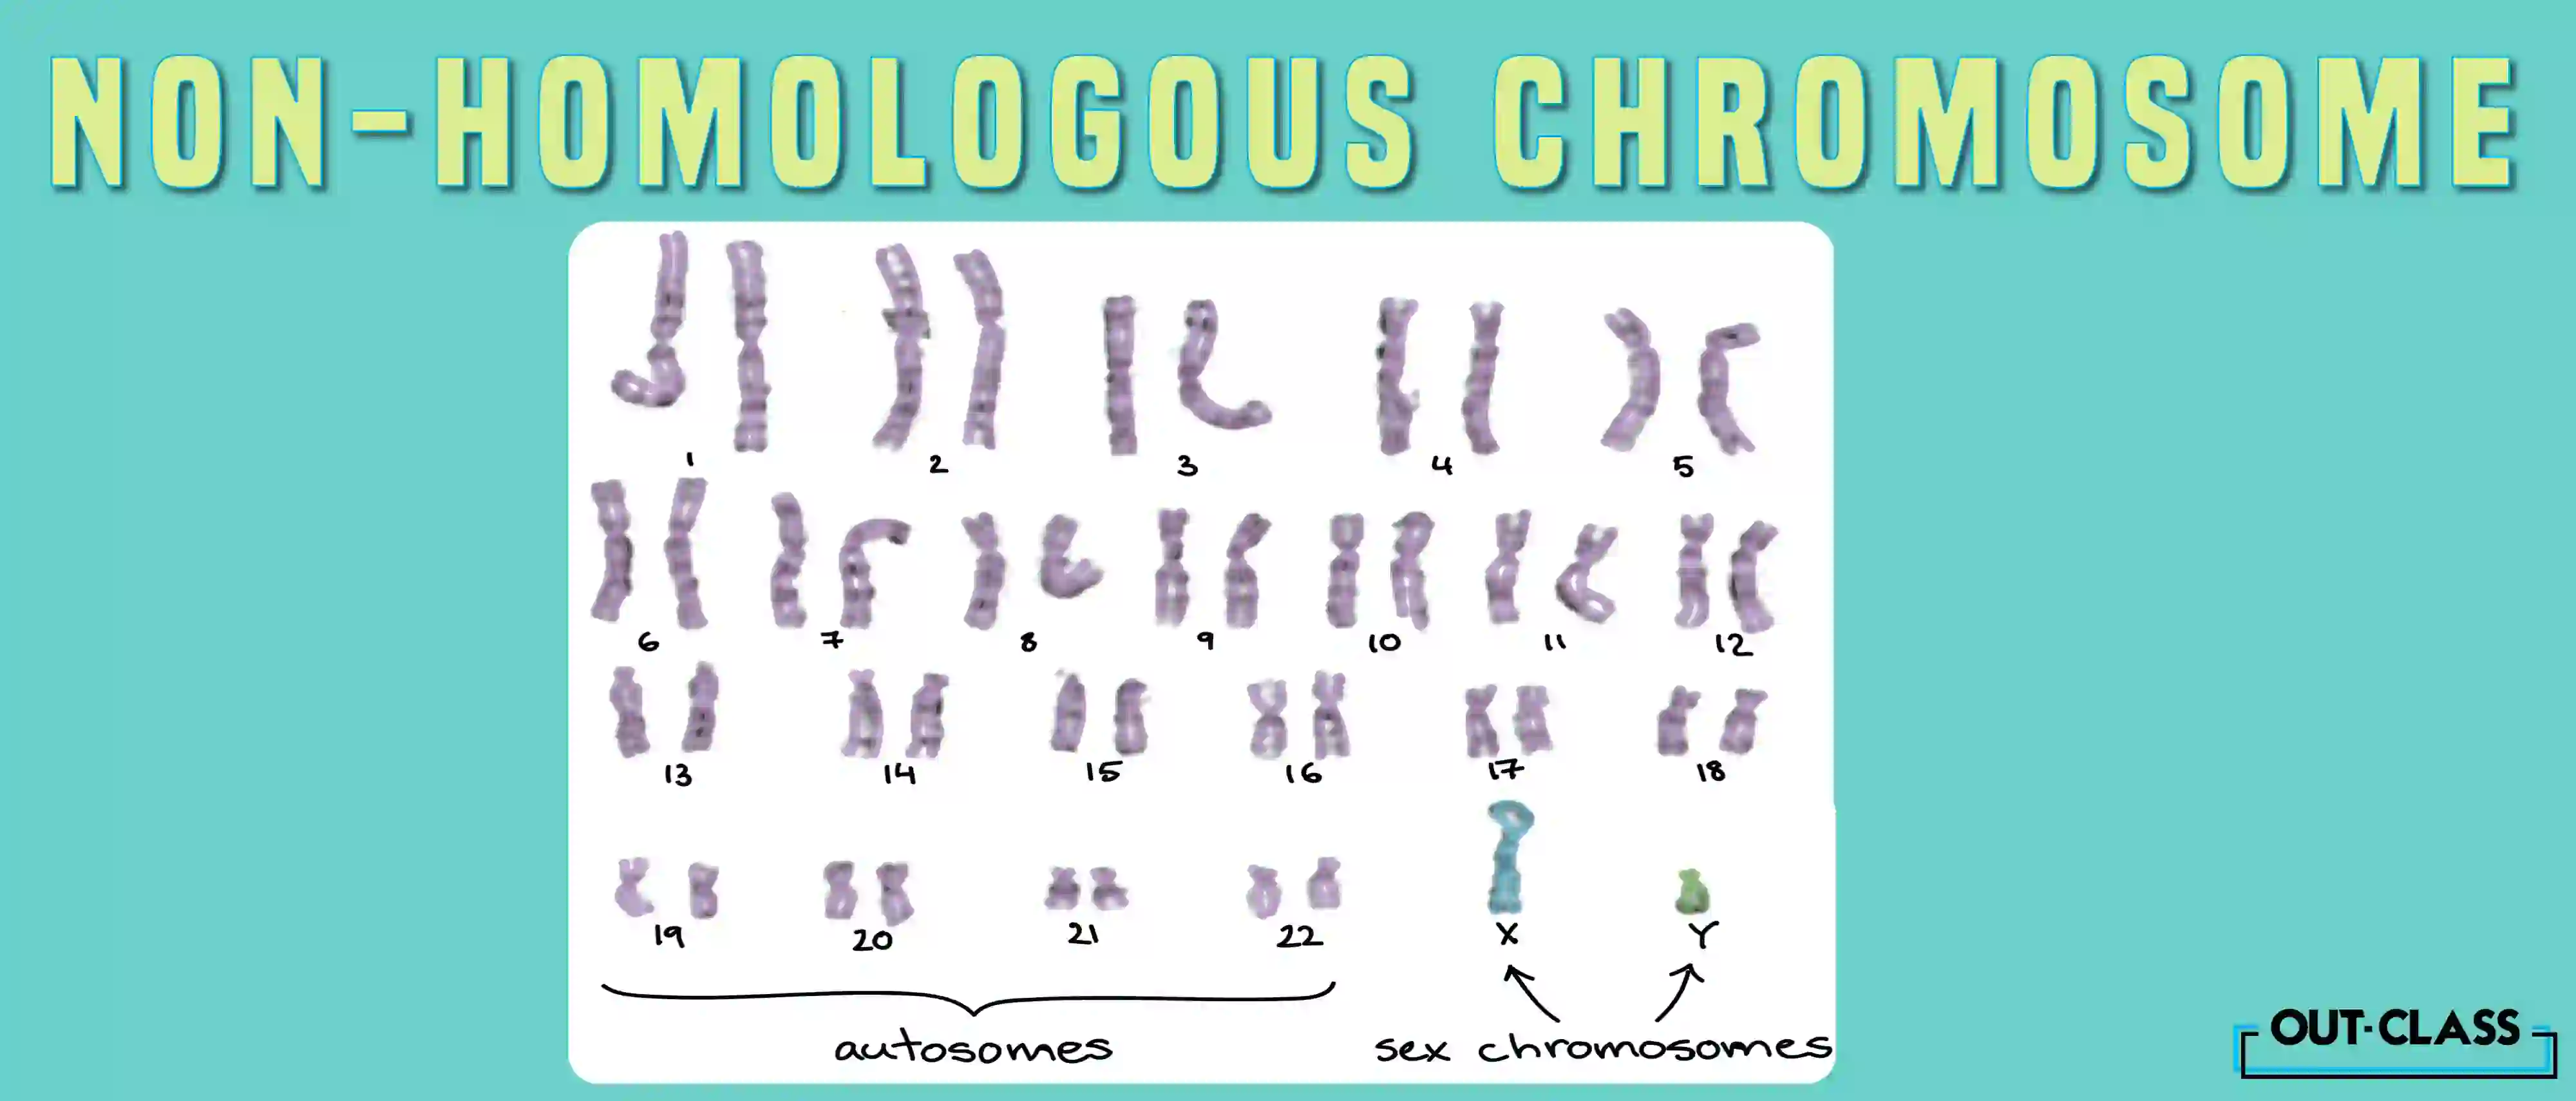 Non-homologous chromosomes are not a pair at all; in fact, they are entirely different from each other and thus, don’t have matching pairs with the same genes. These are also known as your sex chromosomes; meaning, they help determine what gender you are going to have. Girls have two X chromosomes (XX) while boys have one X and one Y chromosome (XY). 